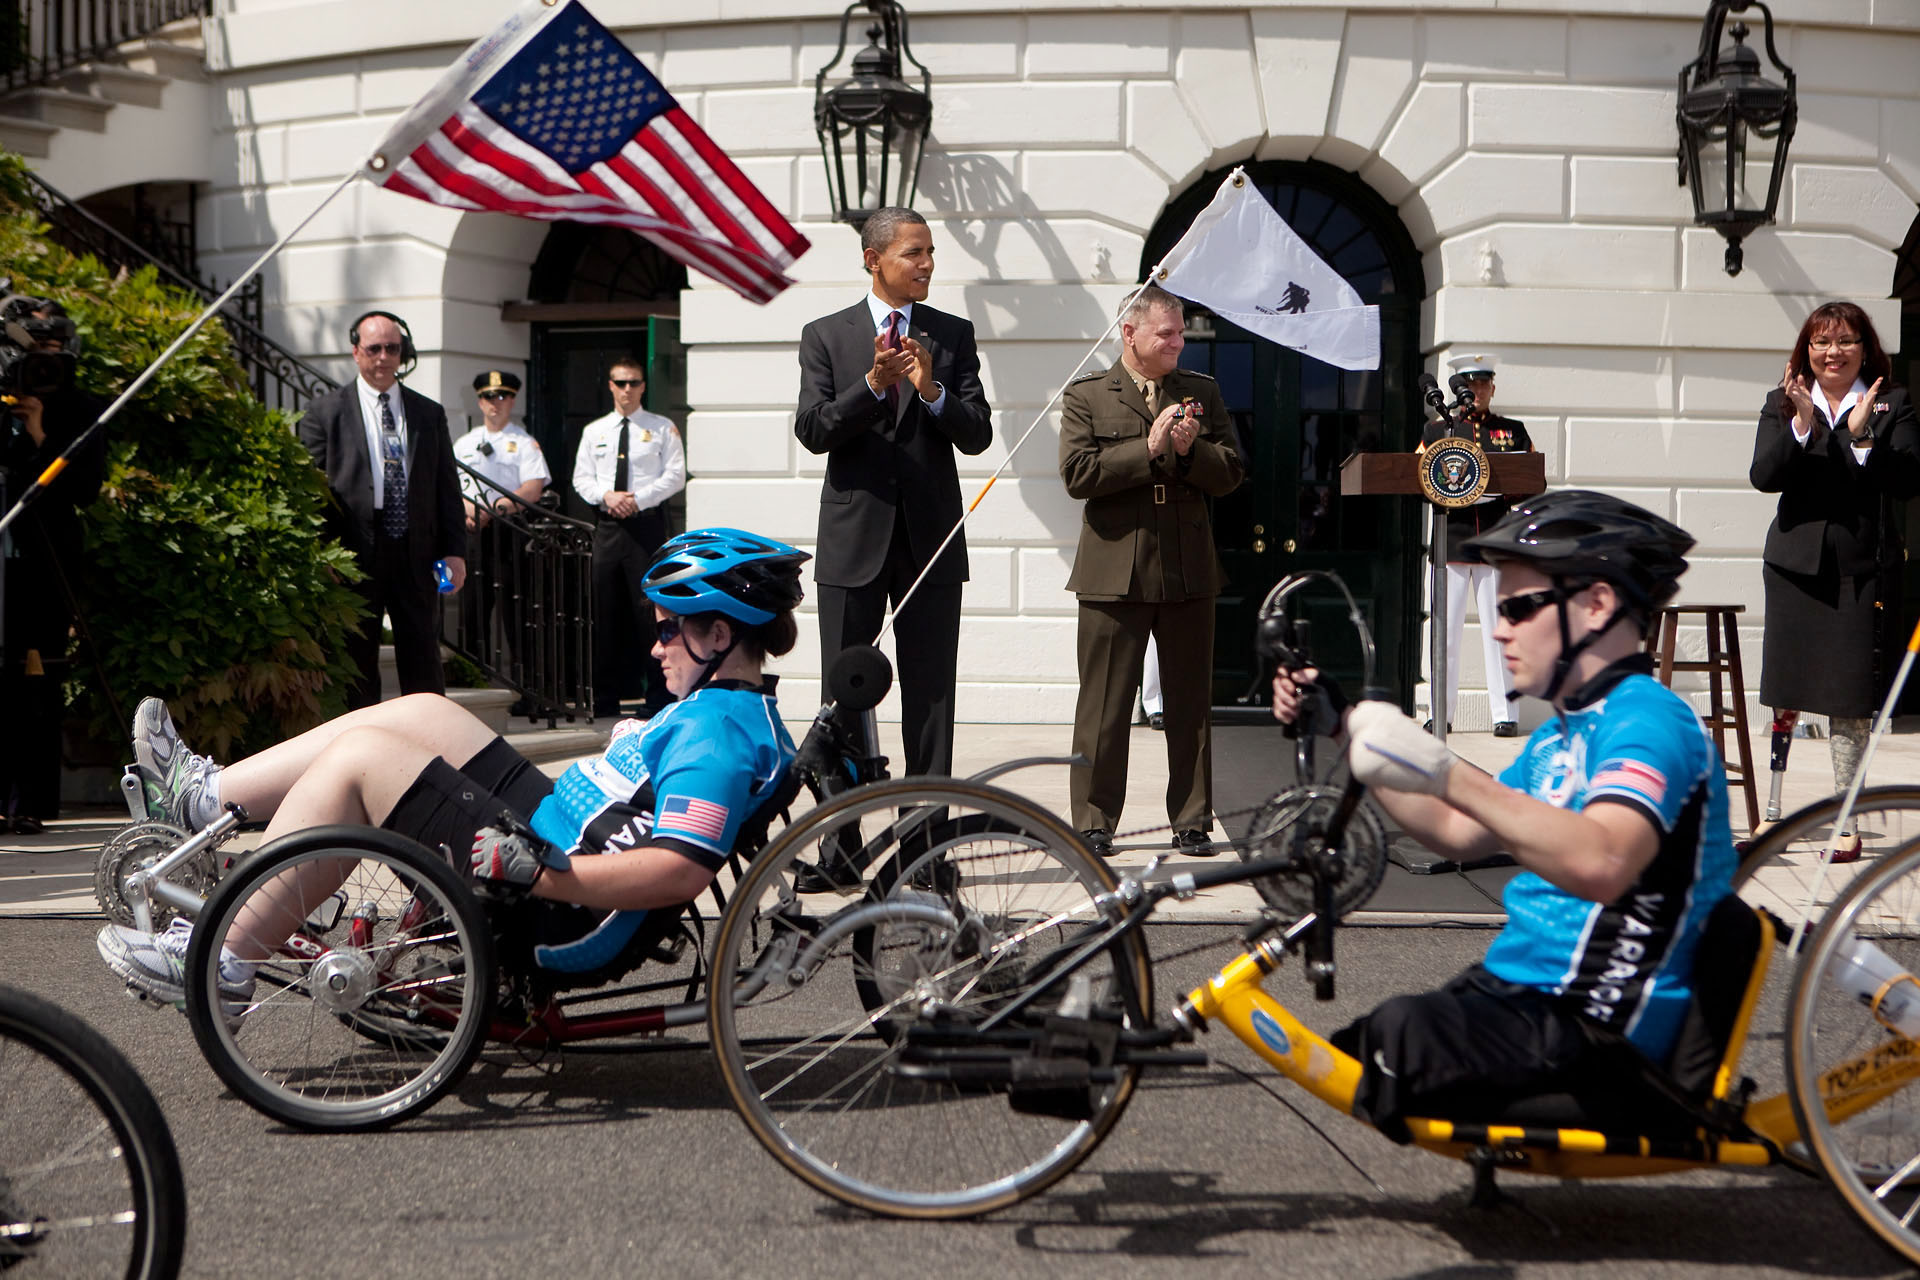 President Obama at Soldier's Ride